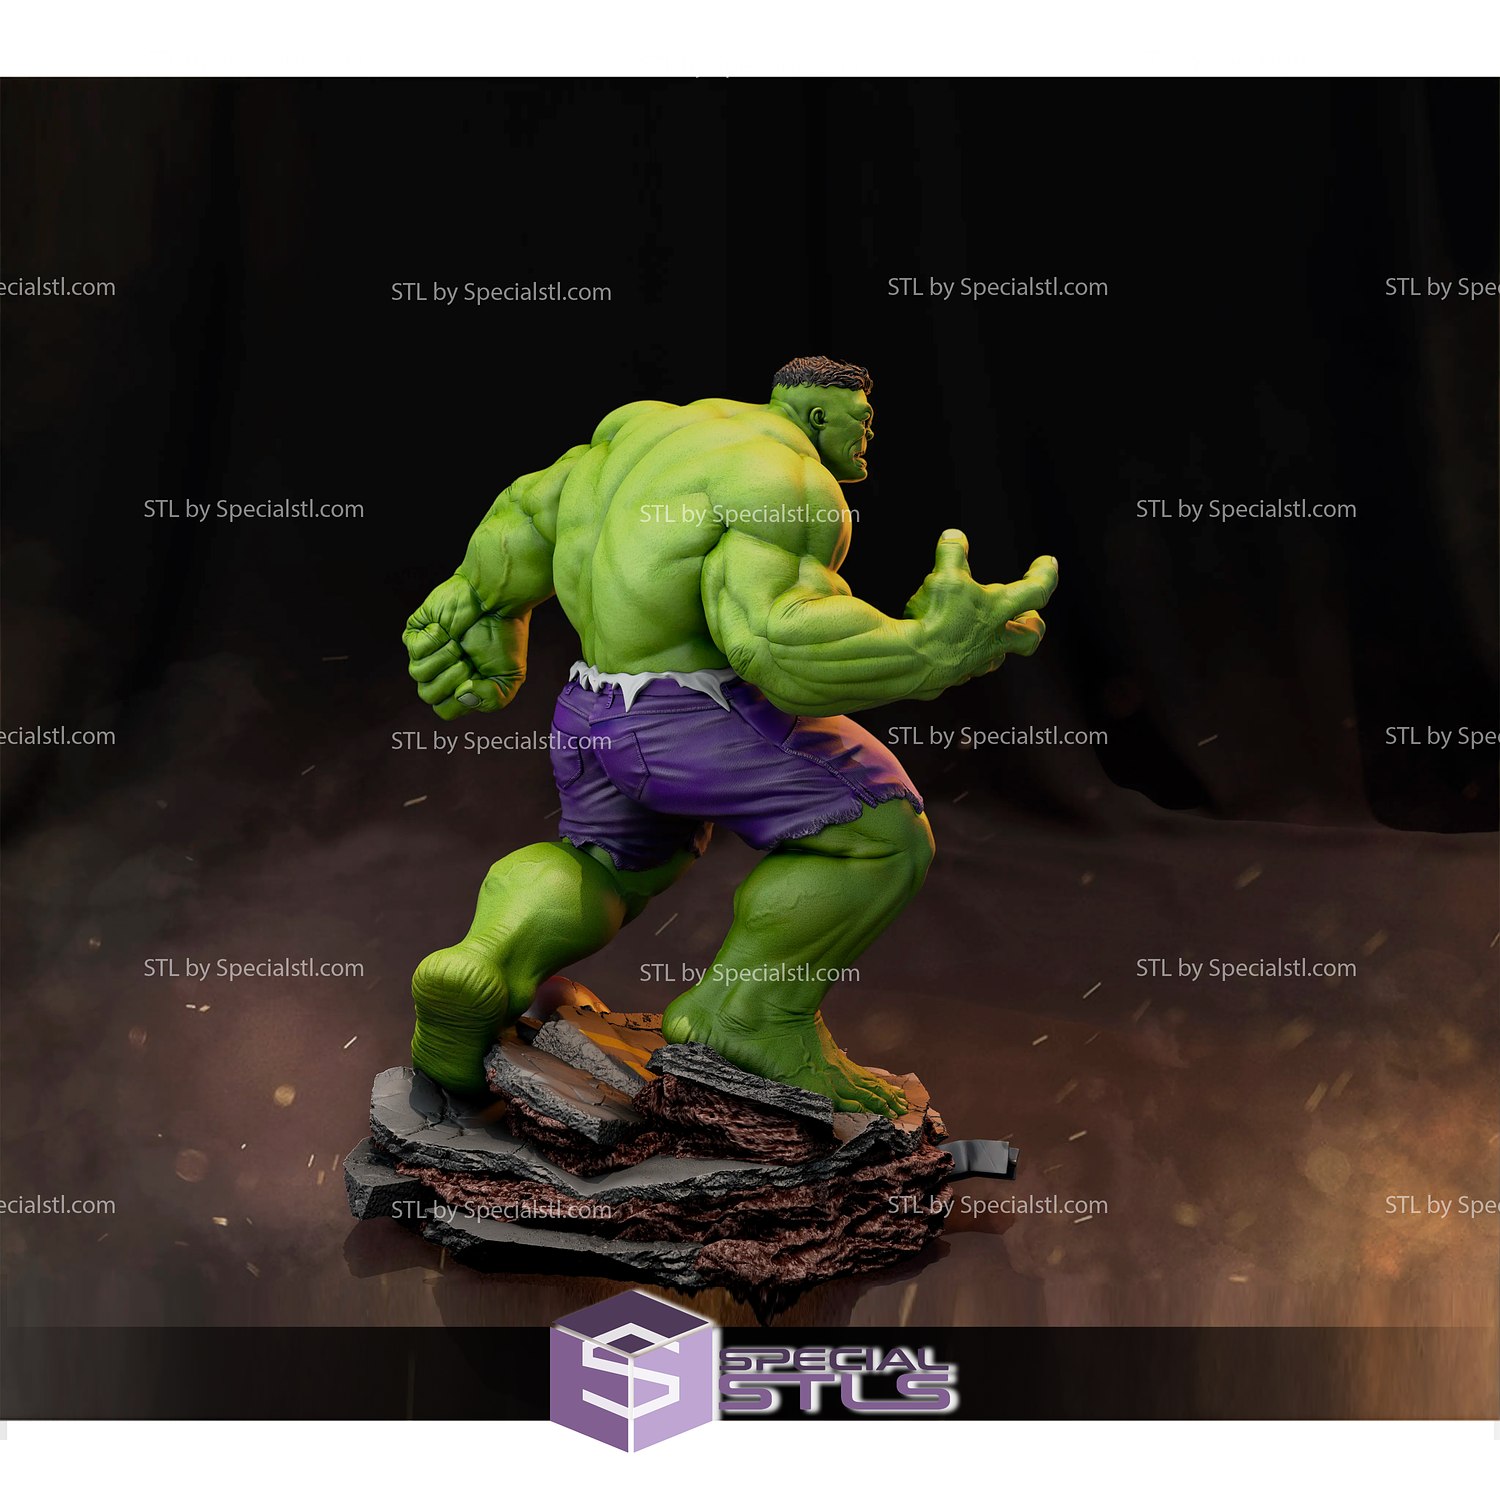 Angry Hulk from Marvel